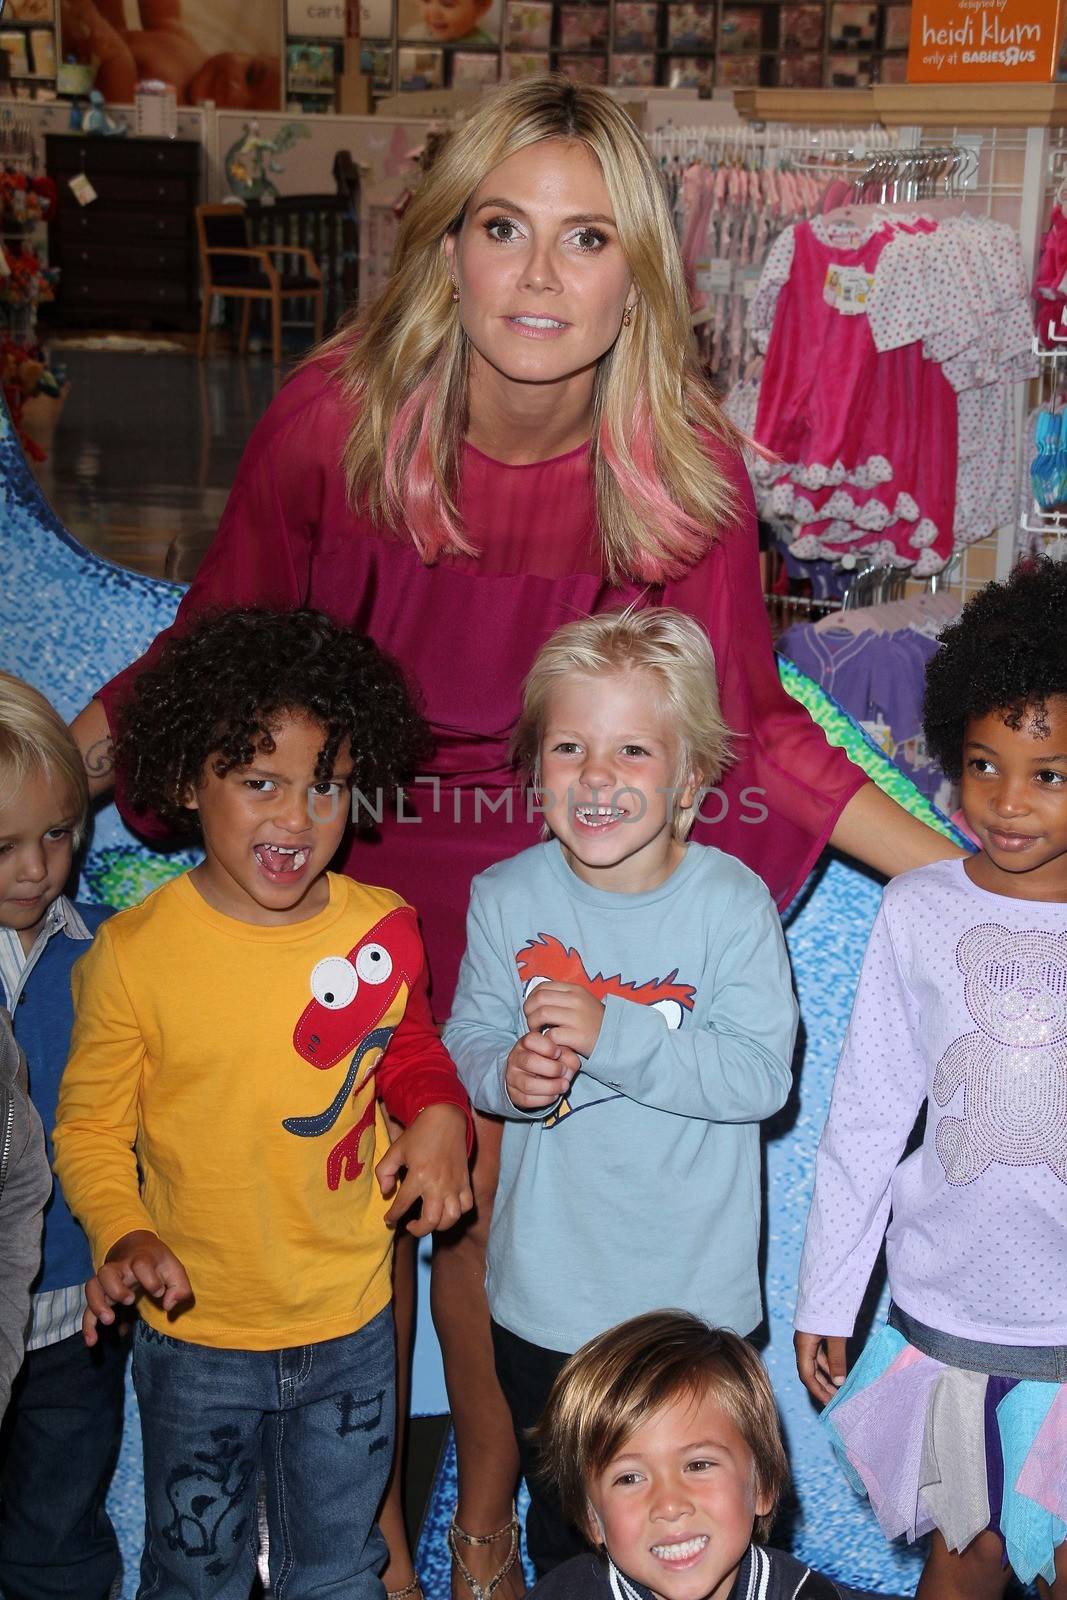 Heidi Klum at her "Truly Scrumptious" Collection Launch, Babies "R" Us, Calabasas, CA 09-14-12/ImageCollect by ImageCollect